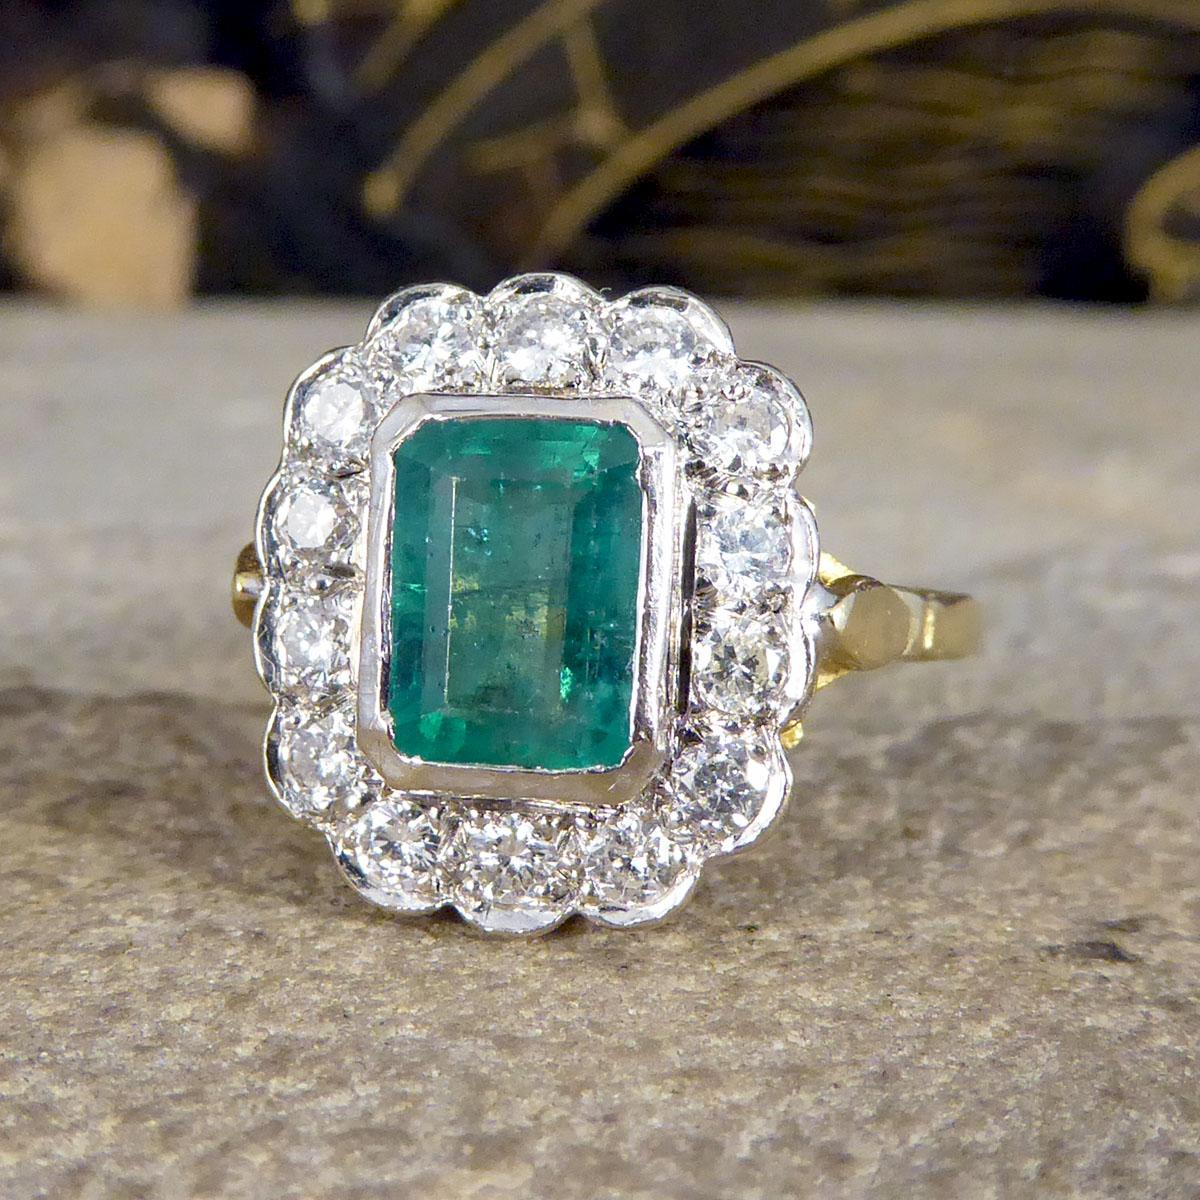 Emerald Cut Vintage 1.25ct Emerald and 0.50ct Diamond Cluster Ring in 18ct Yellow and White